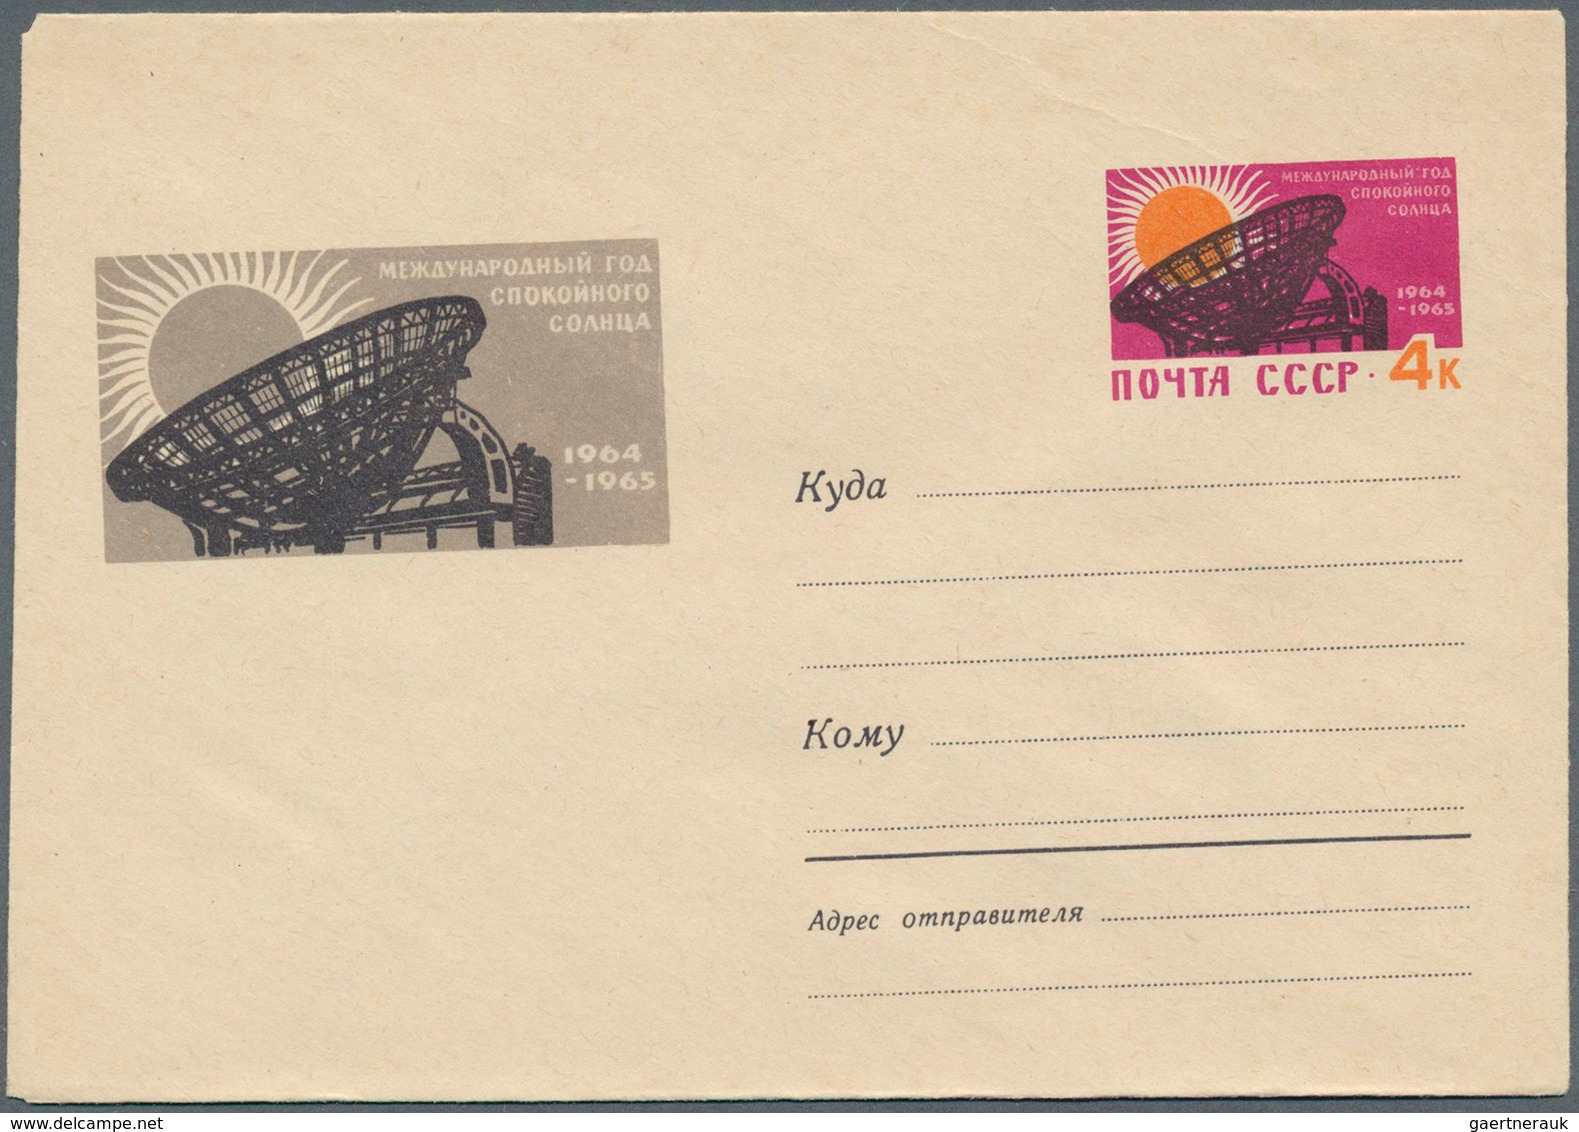 25452 Thematik: Raumfahrt / astronautics: 1953/1976, USSR. Lot of about 98 only different entire envelopes